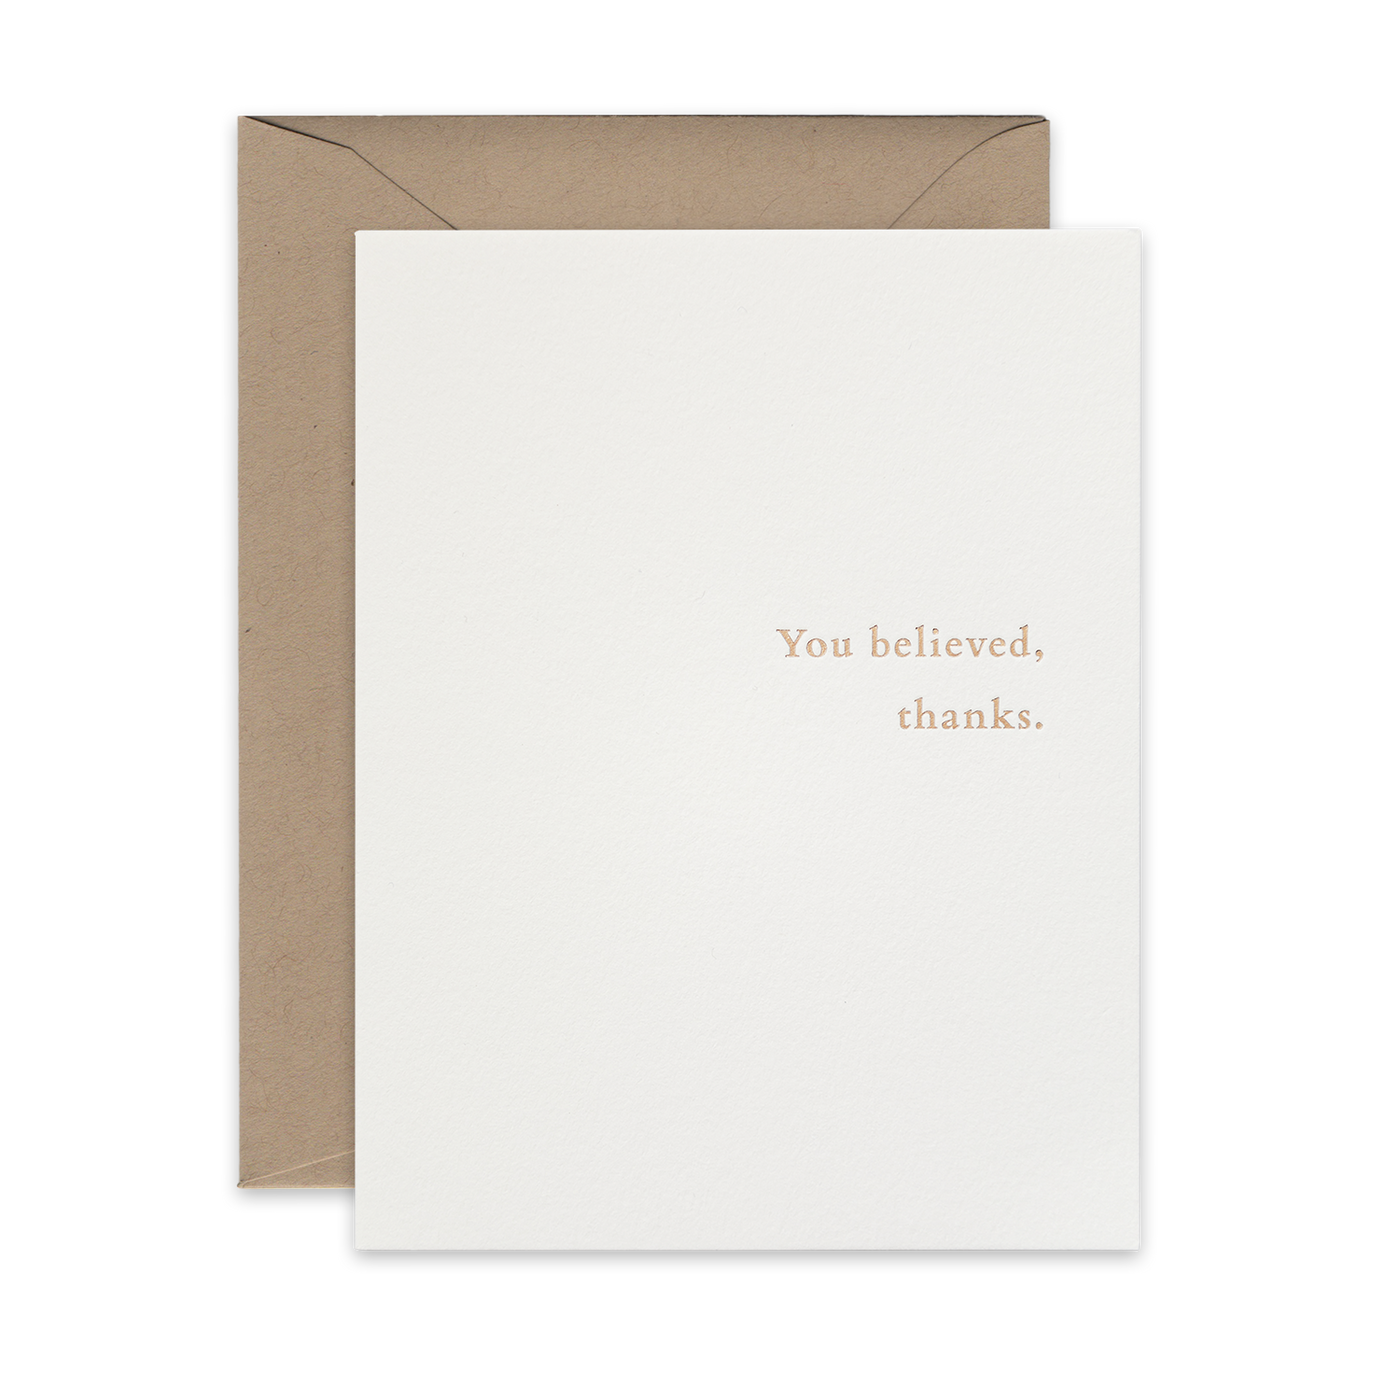 Gold foil letterpress greeting card by beknown. You believed, thanks.